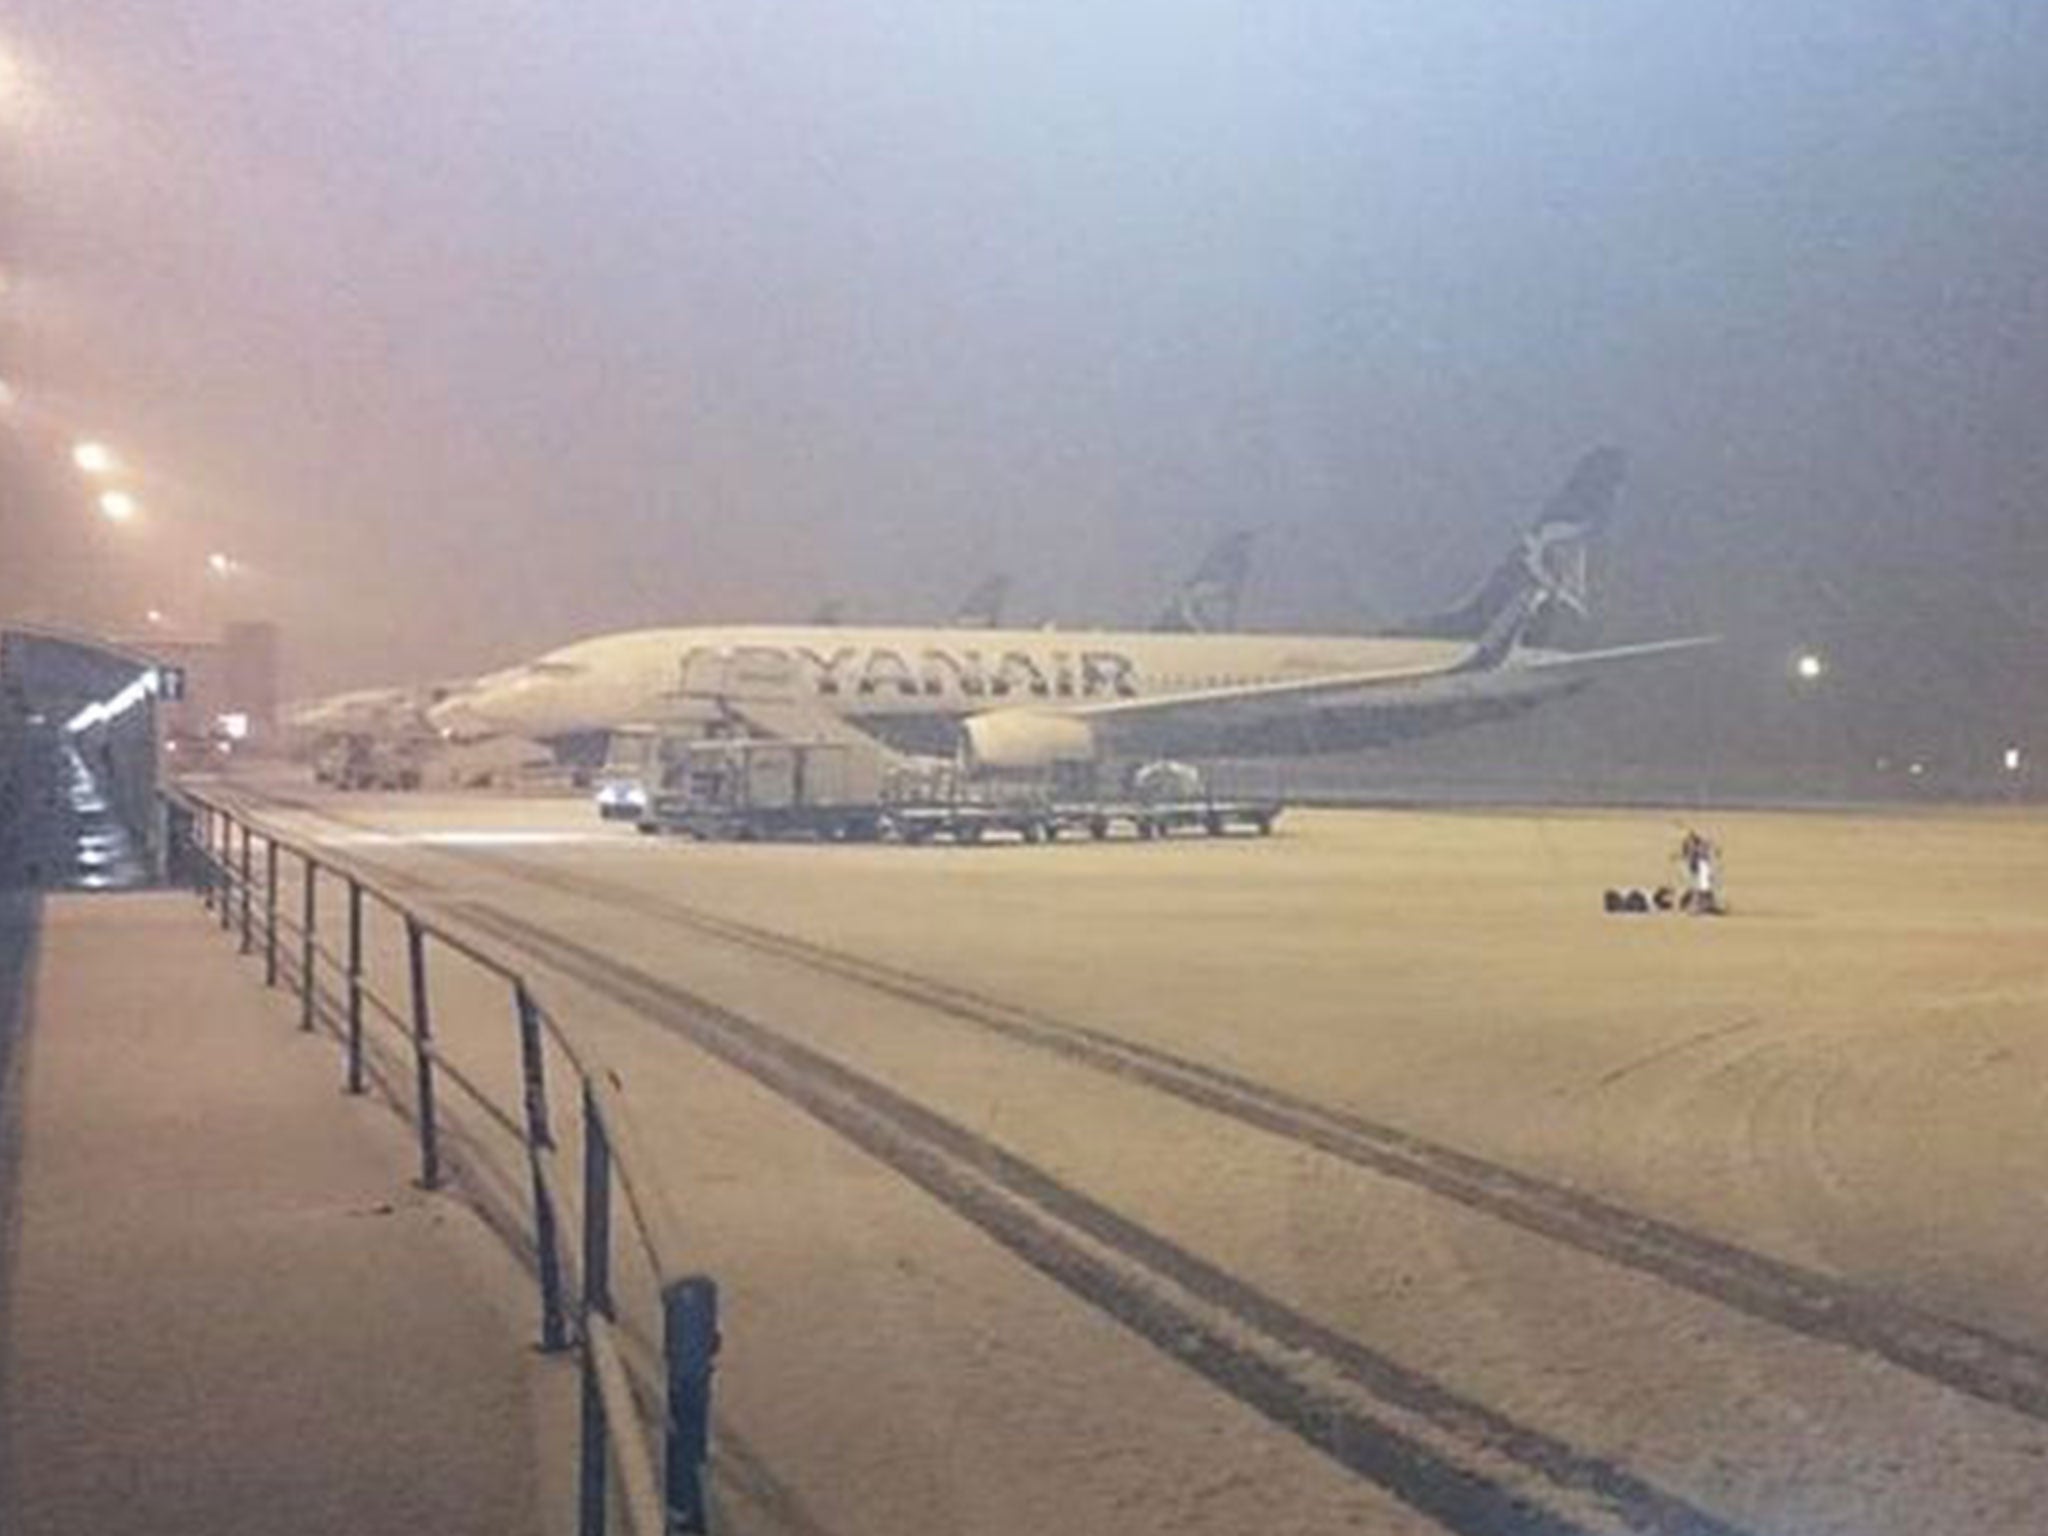 Snow at Liverpool's John Lennon Airport, which closed temporarily on Friday night